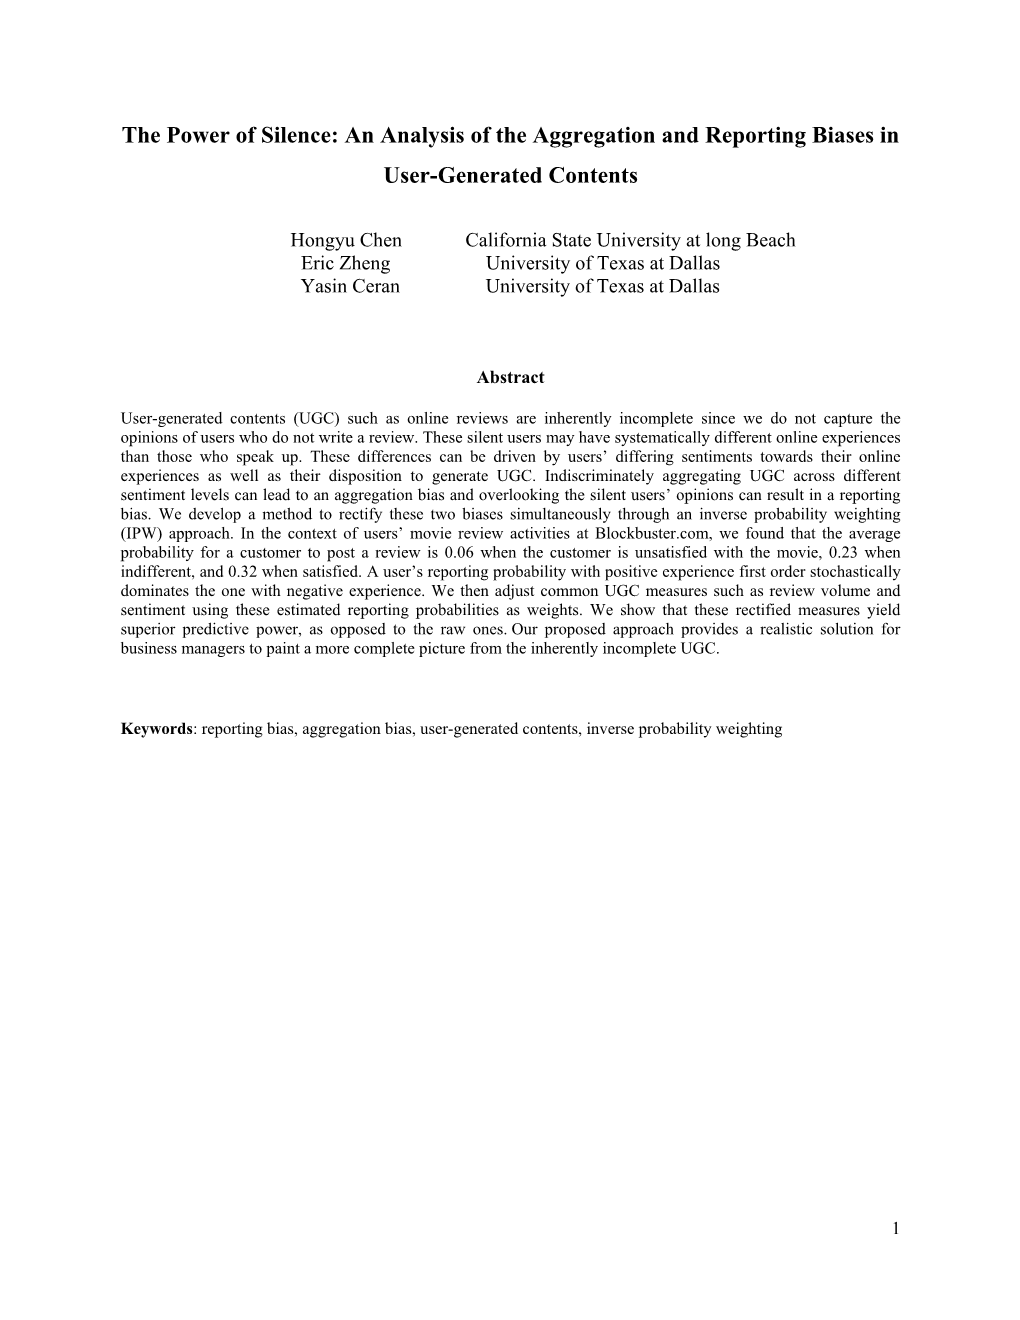 An Analysis of the Aggregation and Reporting Biases in User-Generated Contents